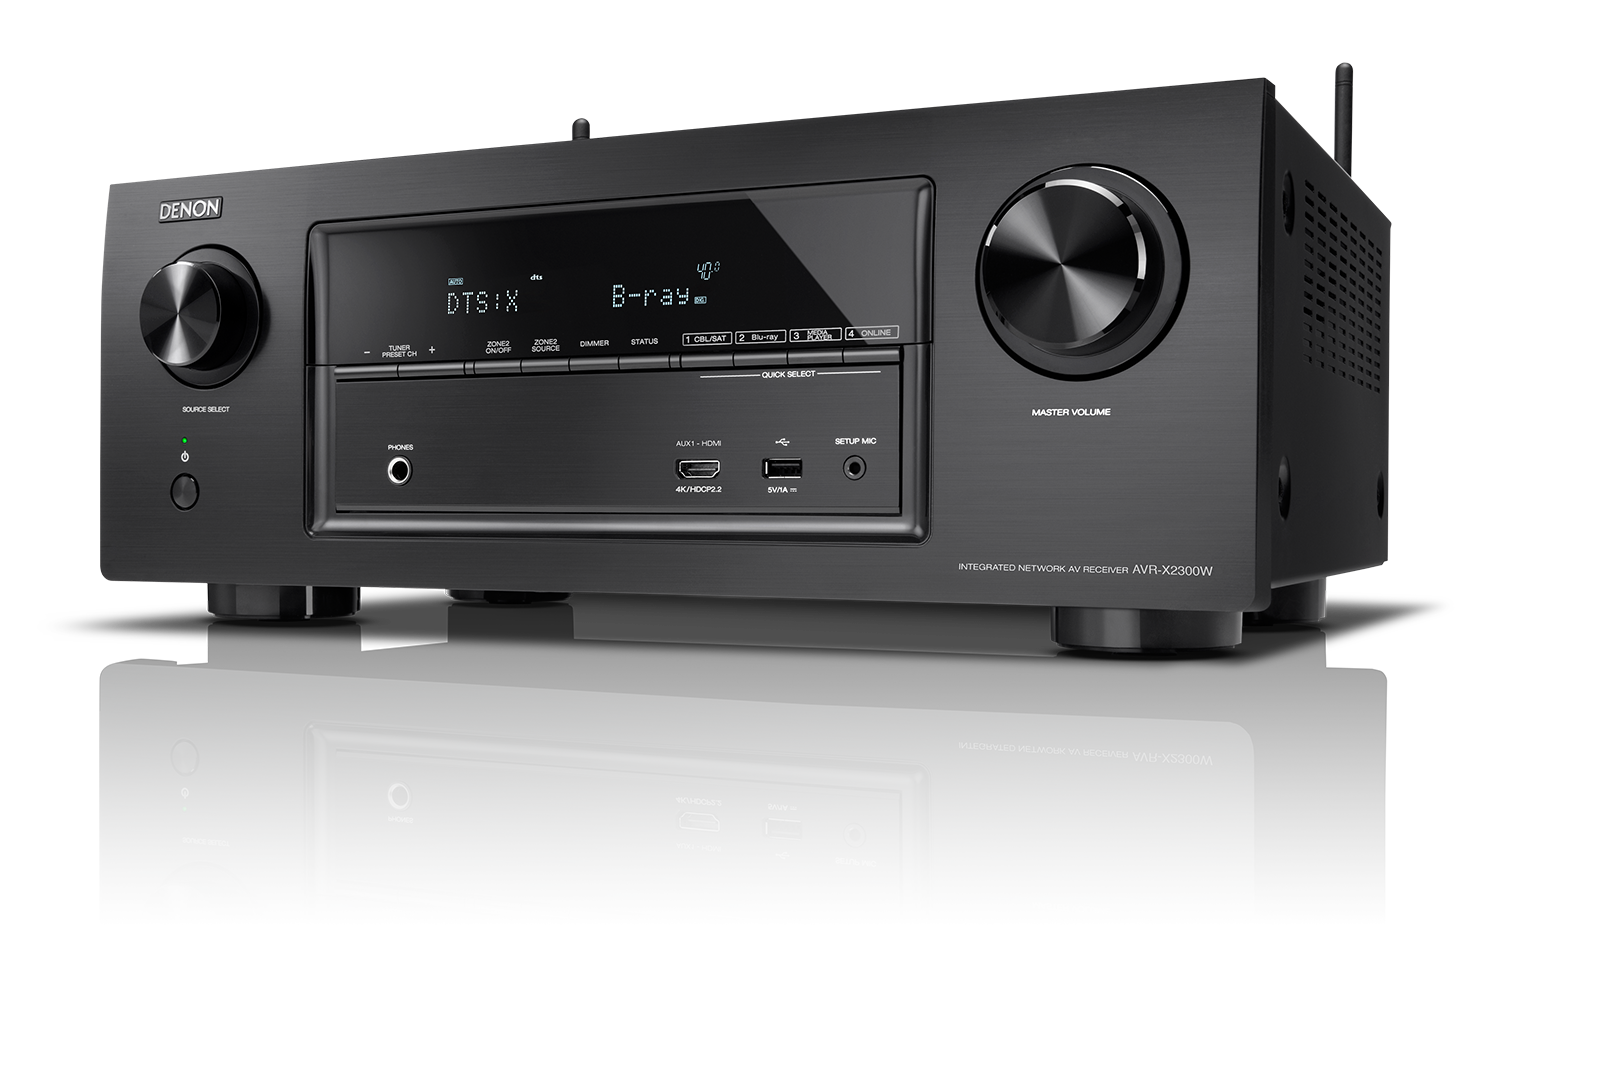 7 channel AV receiver with WiFi, Bluetooth and 3D Sound